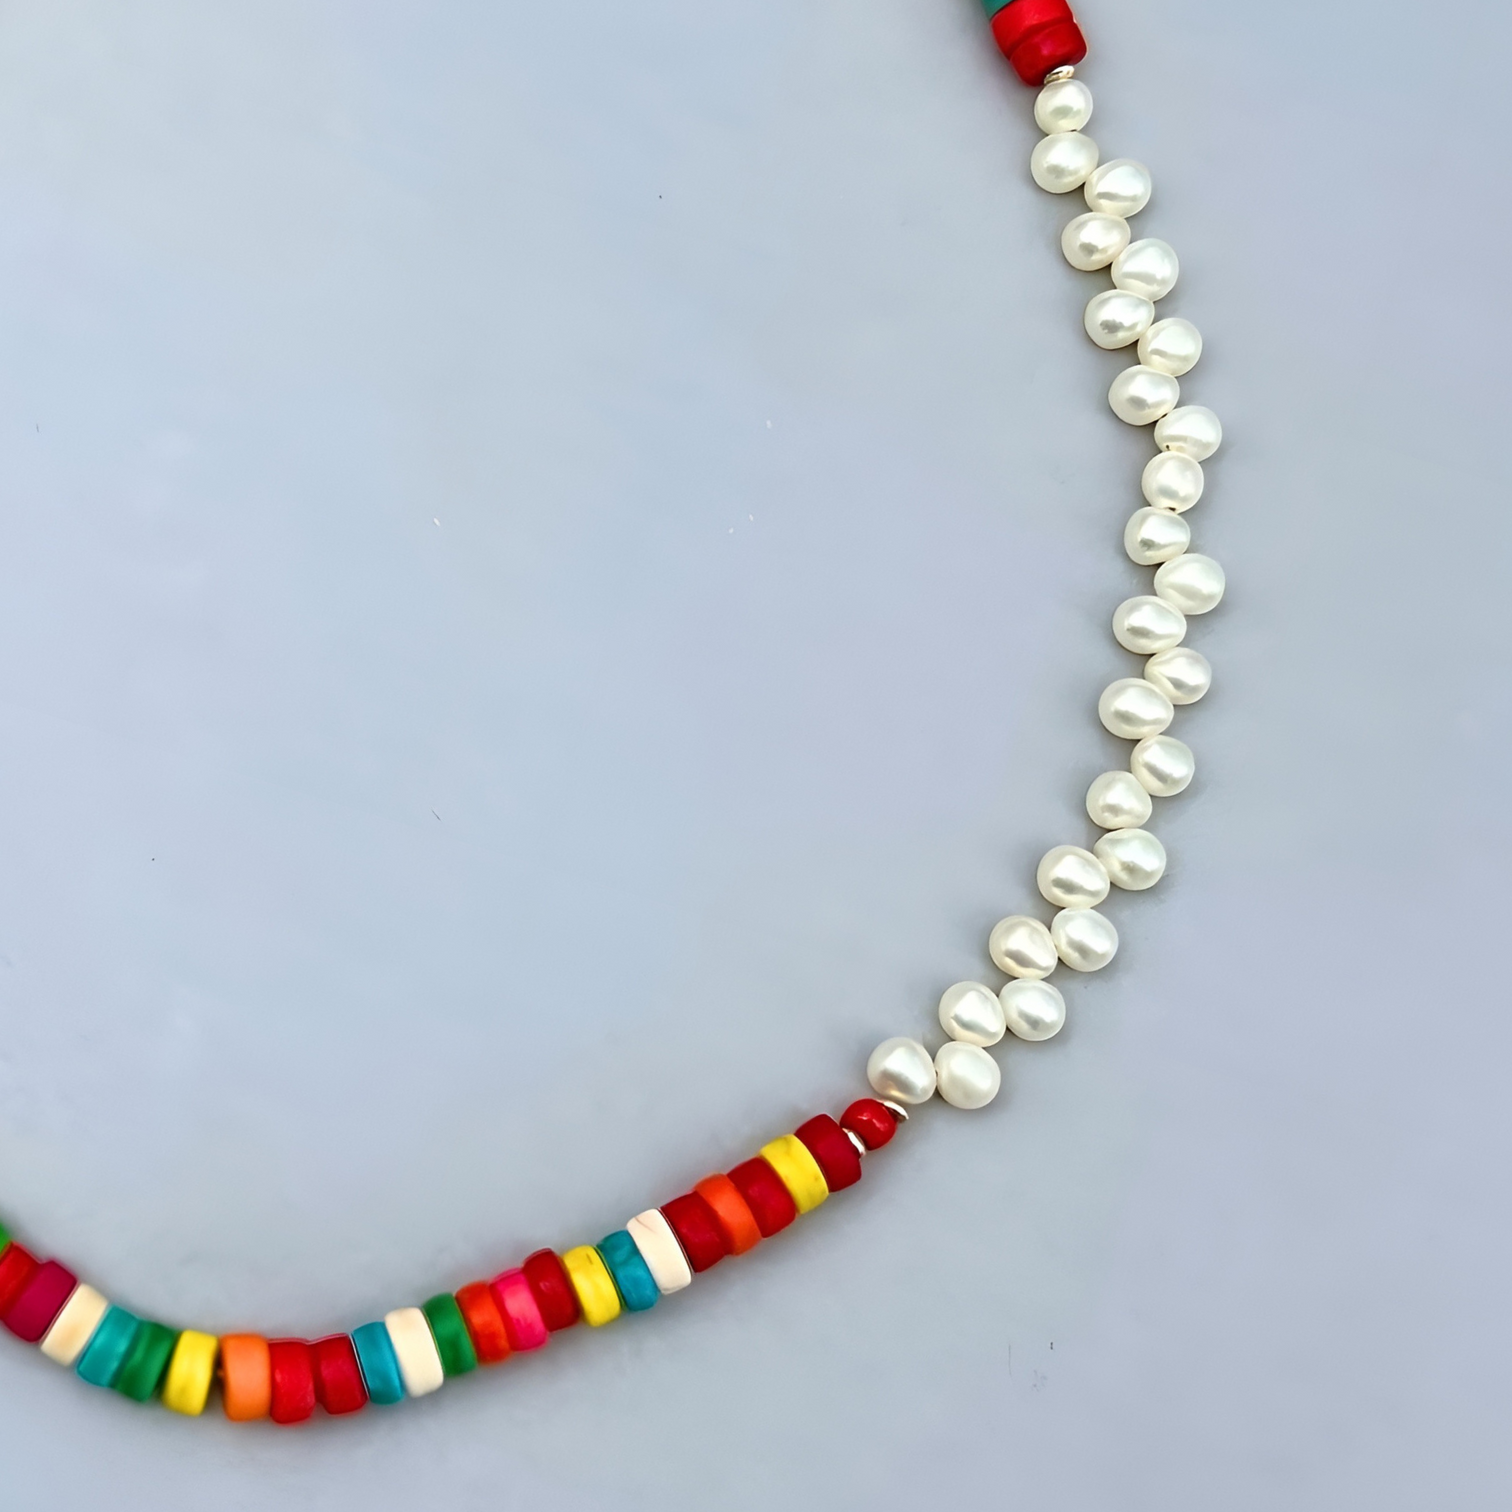 The trendy Le BijouBijou Rainbow Necklace made with Pearls and multicolored Howlite Discs. Detail shot